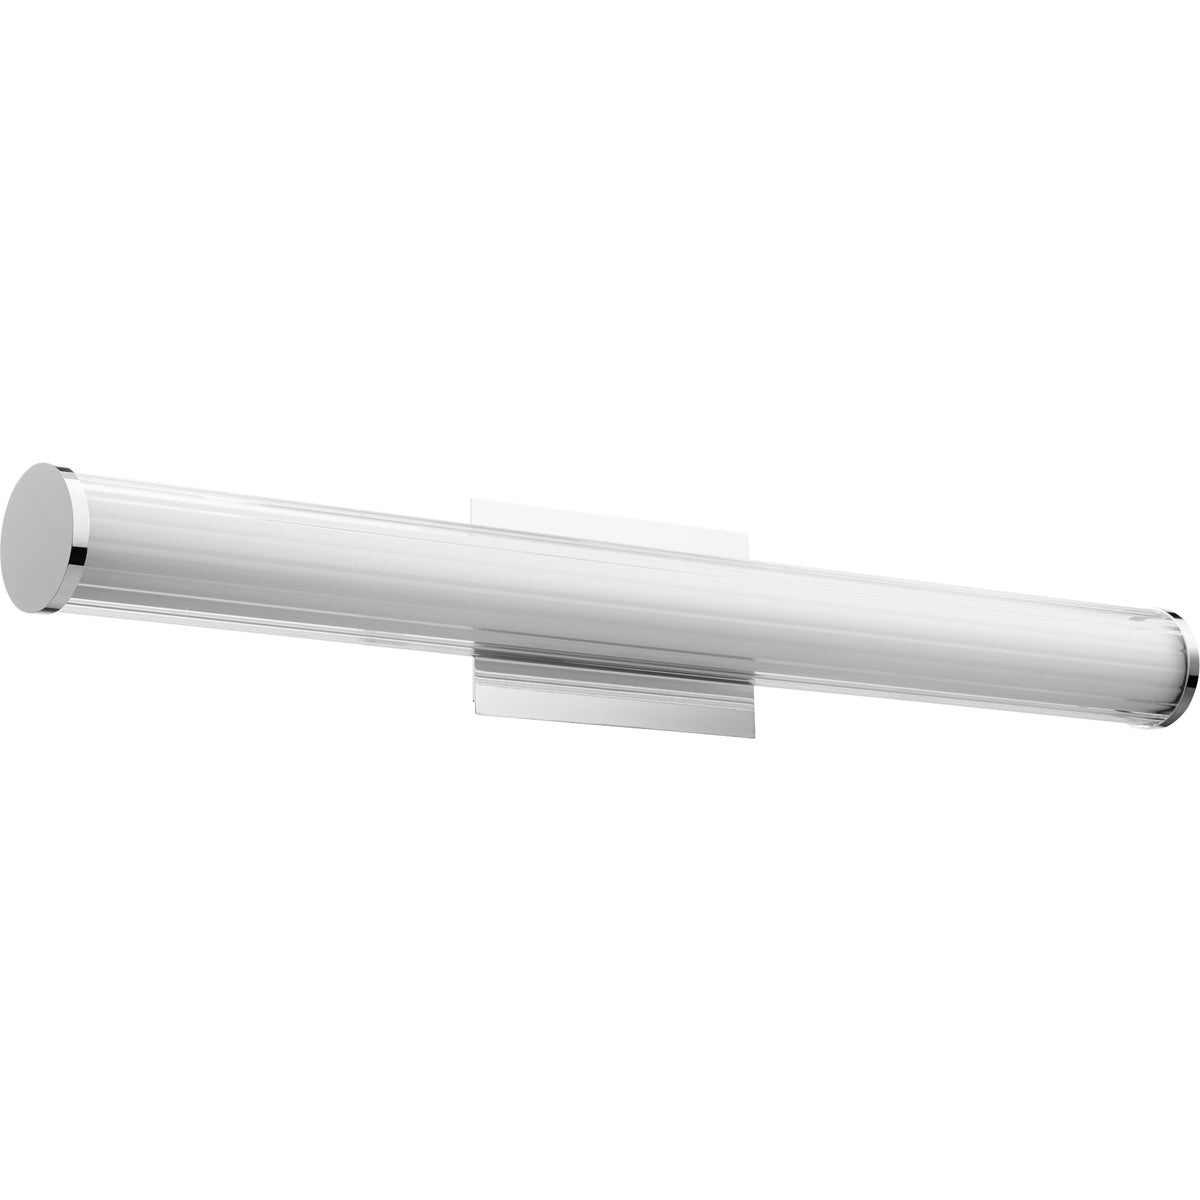 LED Vanity Light by Quorum International - A sleek and modern light fixture with clean lines. Perfect for any residential space. 26W LED, 2205 lumens, 3000K color temperature. Dimmable and UL Listed. 34.5"W x 5.25"H x 3.75"E. 2-year warranty.